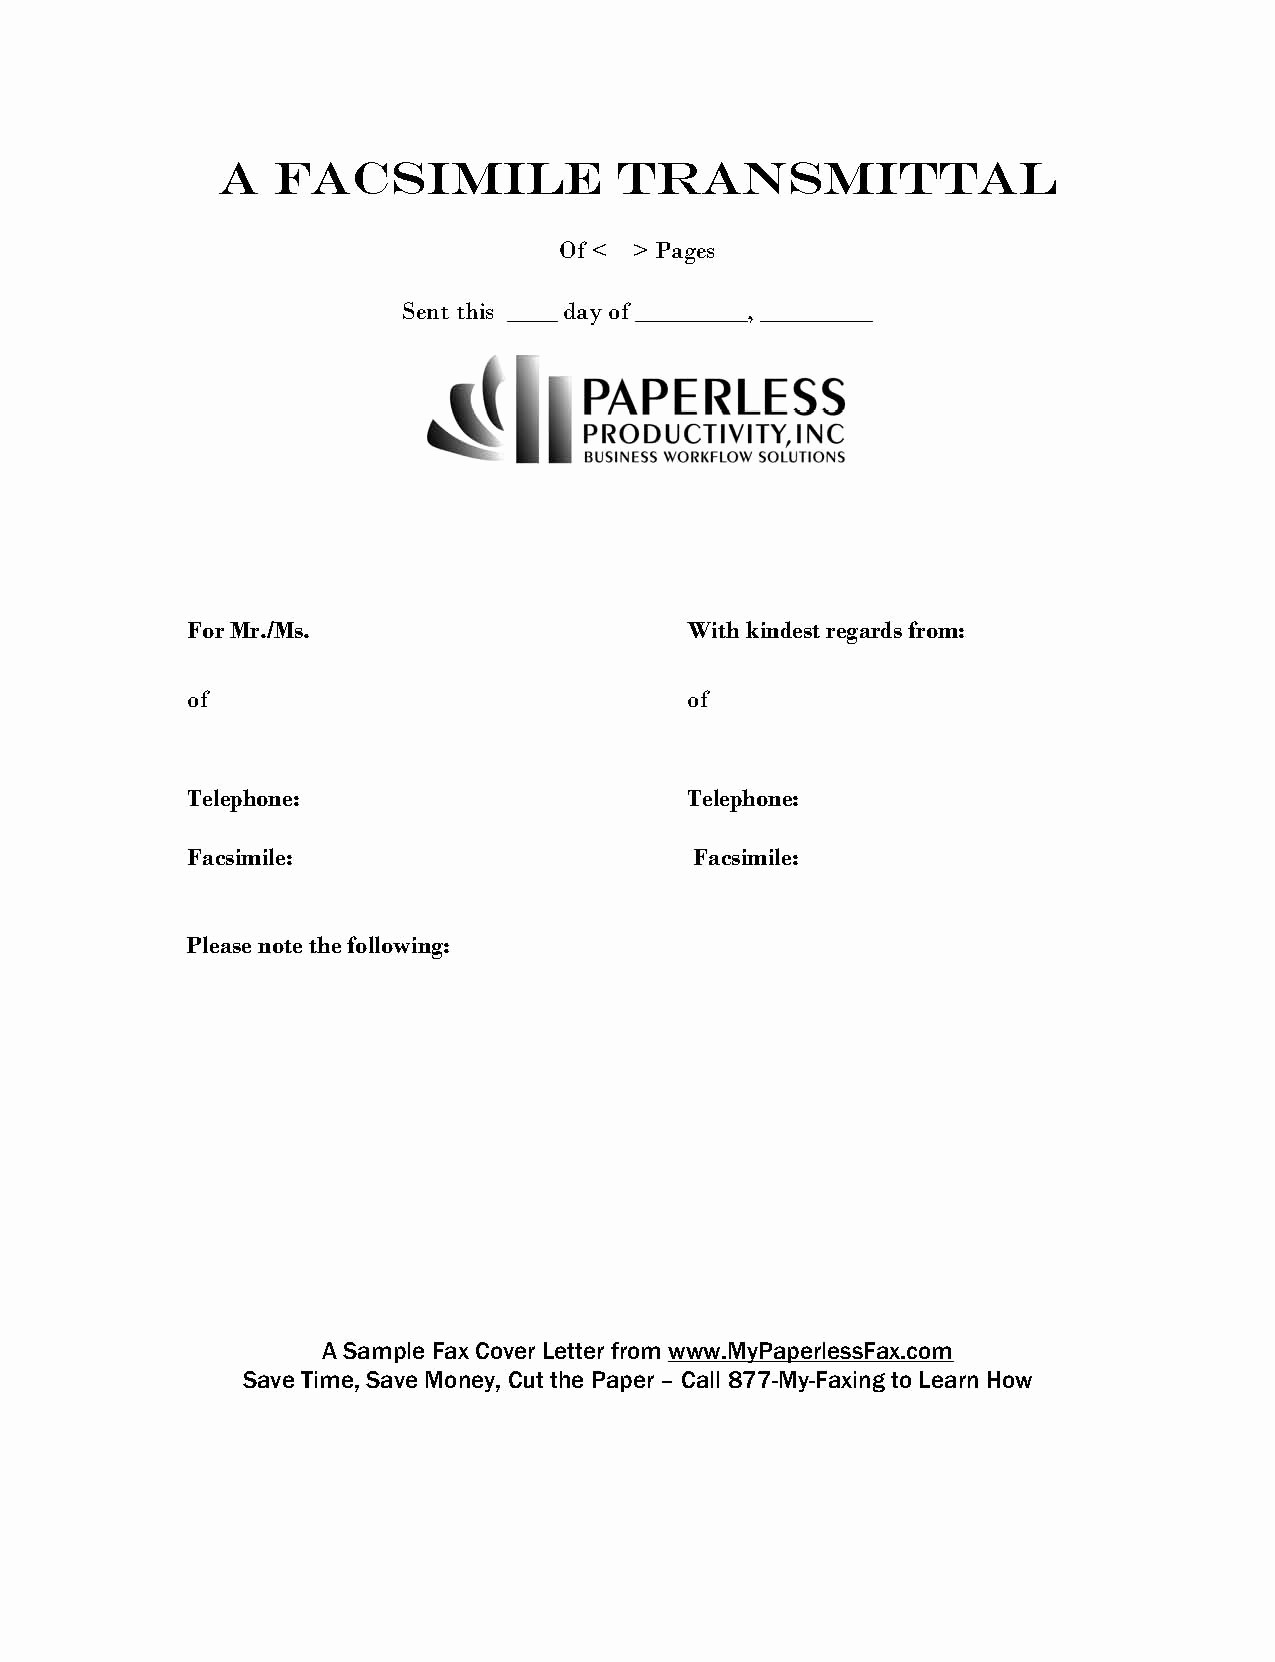 Fax Cover Sheet with Logo Beautiful How to Write Cover Letter for Fax